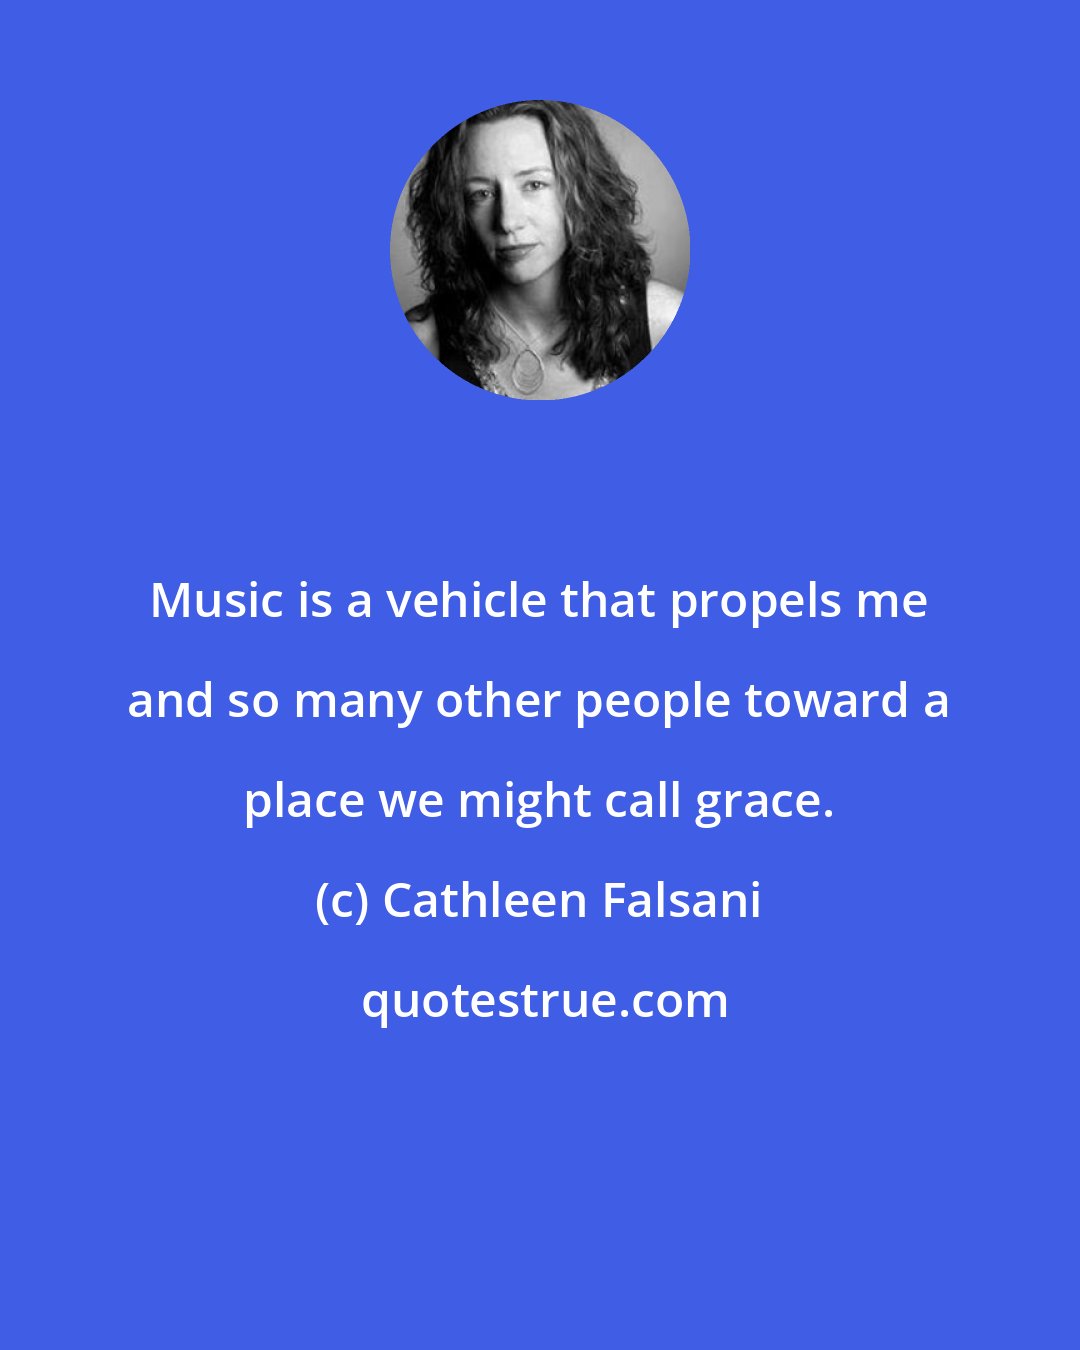 Cathleen Falsani: Music is a vehicle that propels me and so many other people toward a place we might call grace.